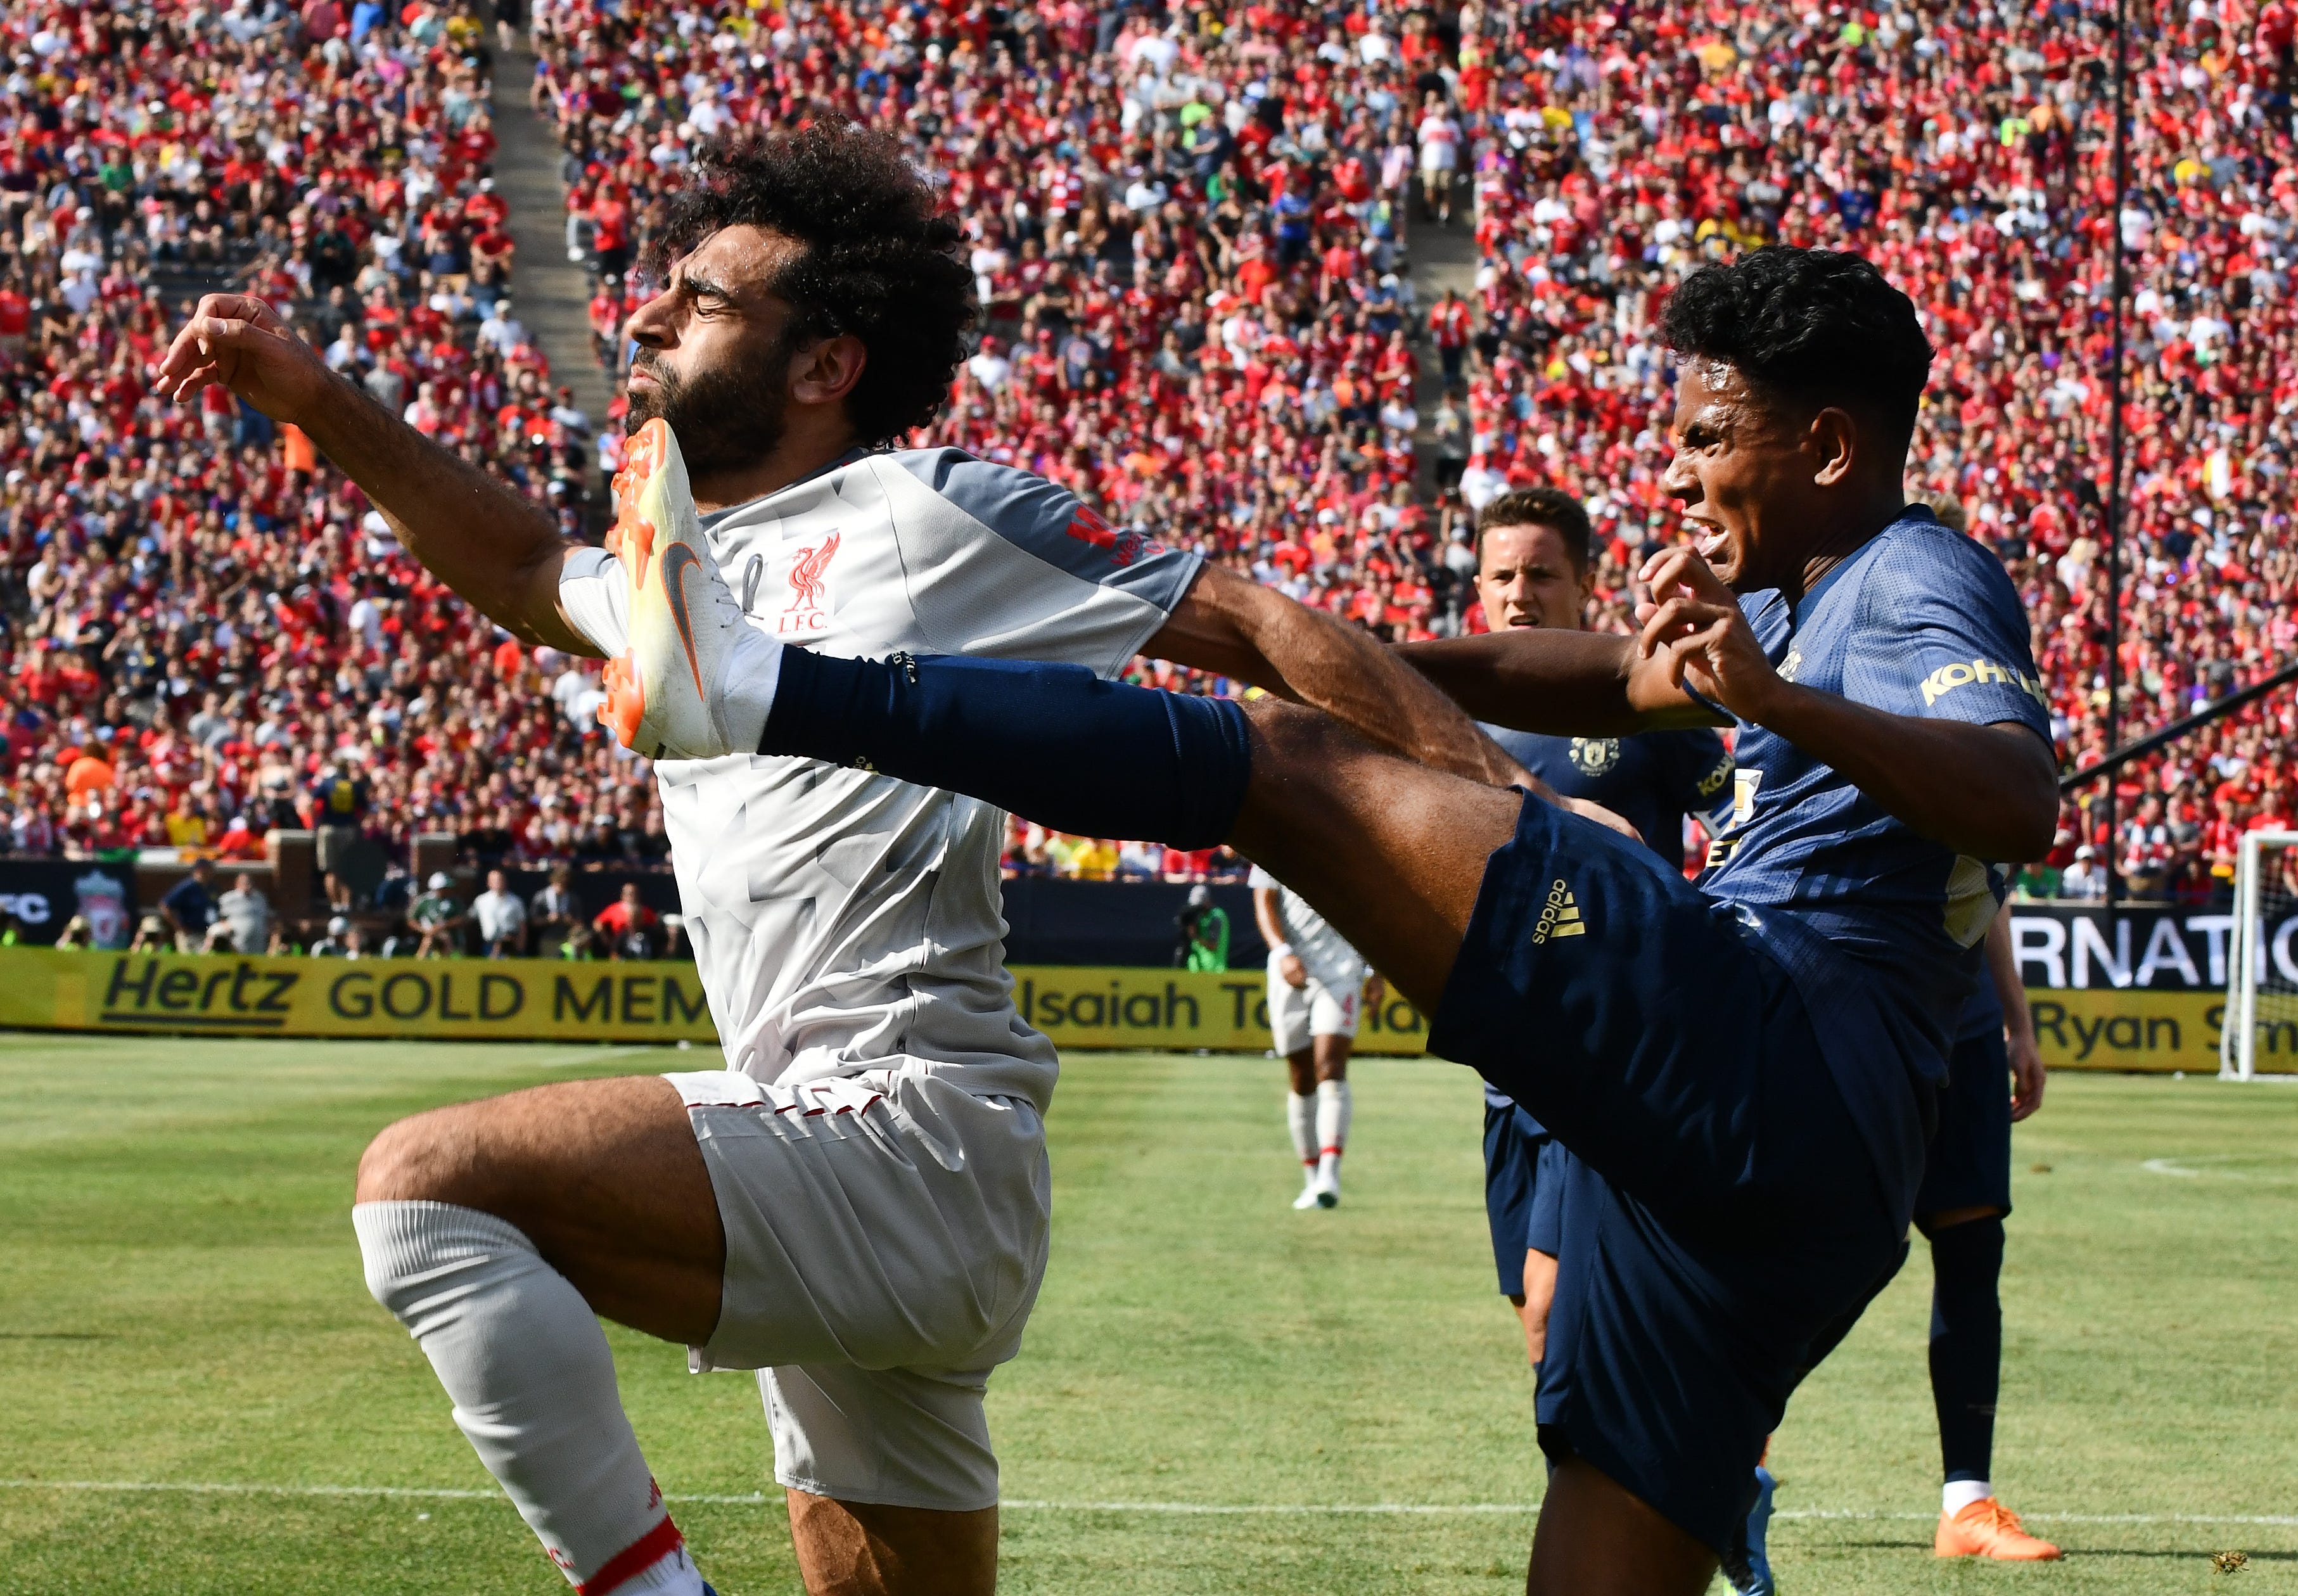 Liverpool's Mohamed Salah gets kicked in the face by Manchester United's Demetri Mitchell, which gave Liverpool a penalty kick and put it on the board first in the first half of the International Champions Cup at Michigan Stadium on the campus of University of Michigan in Ann Arbor, Michigan on July 28, 2018. Liverpool won the match, 4-1.